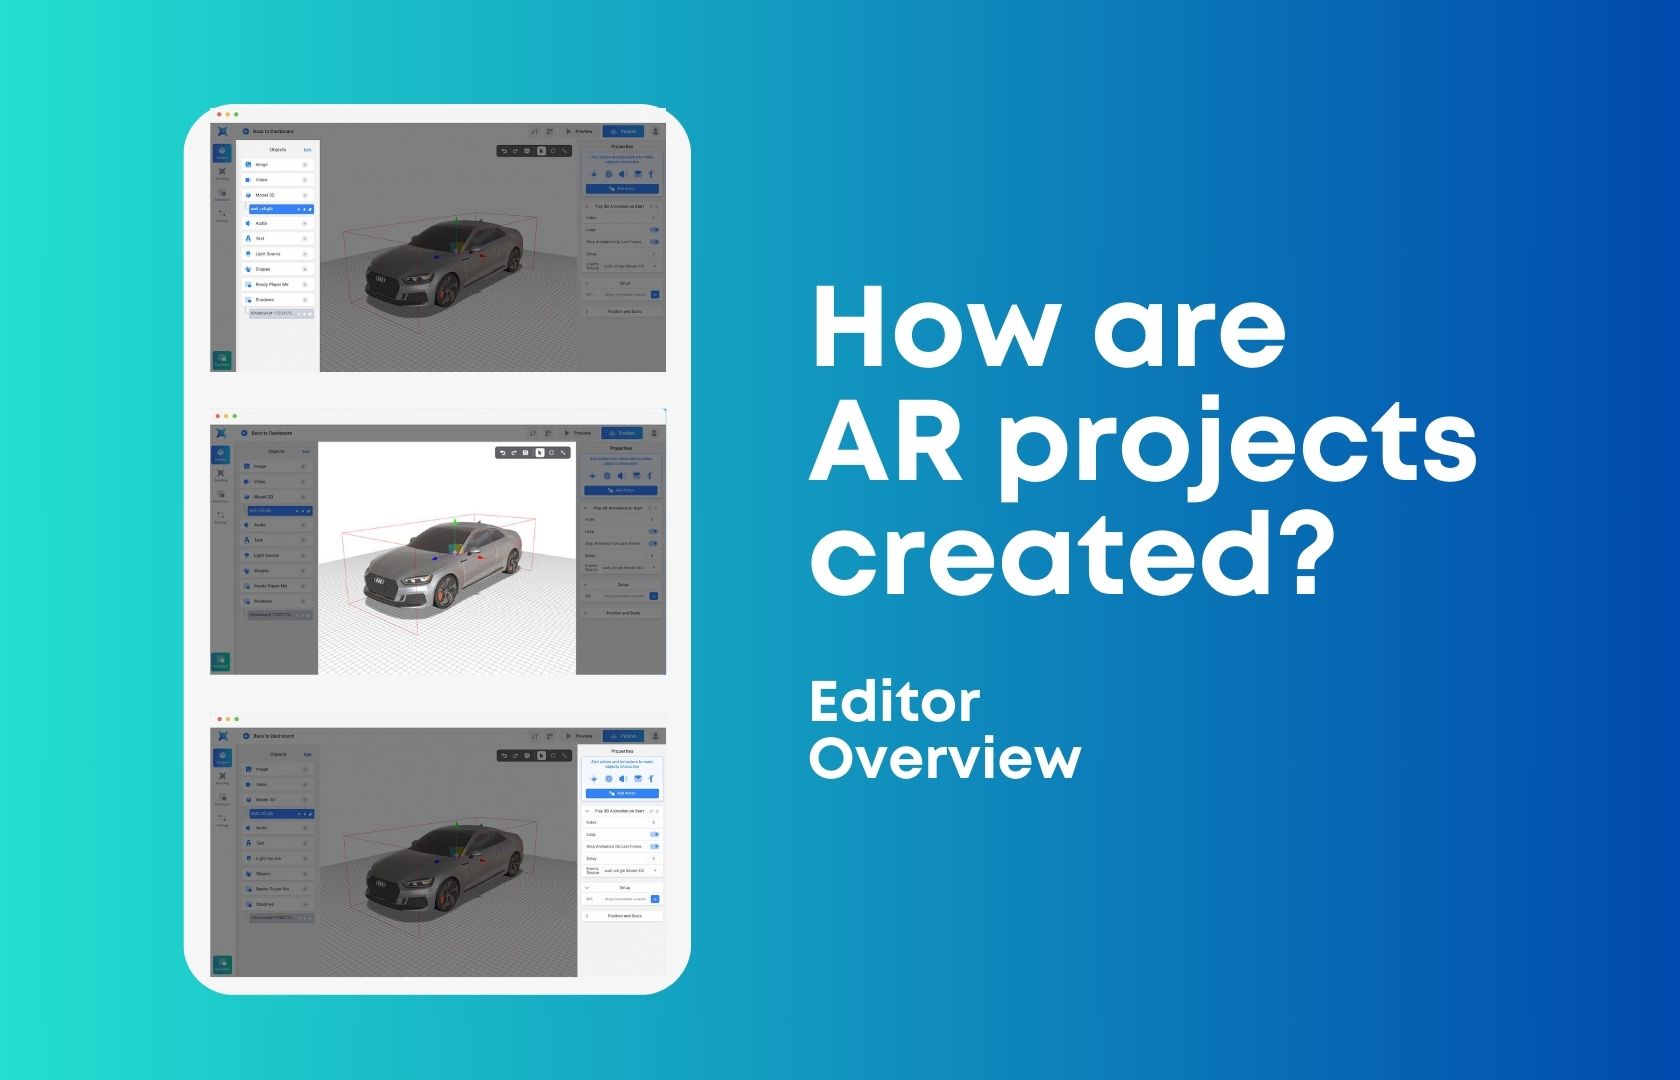 How are augmented reality projects created? Editor Overview